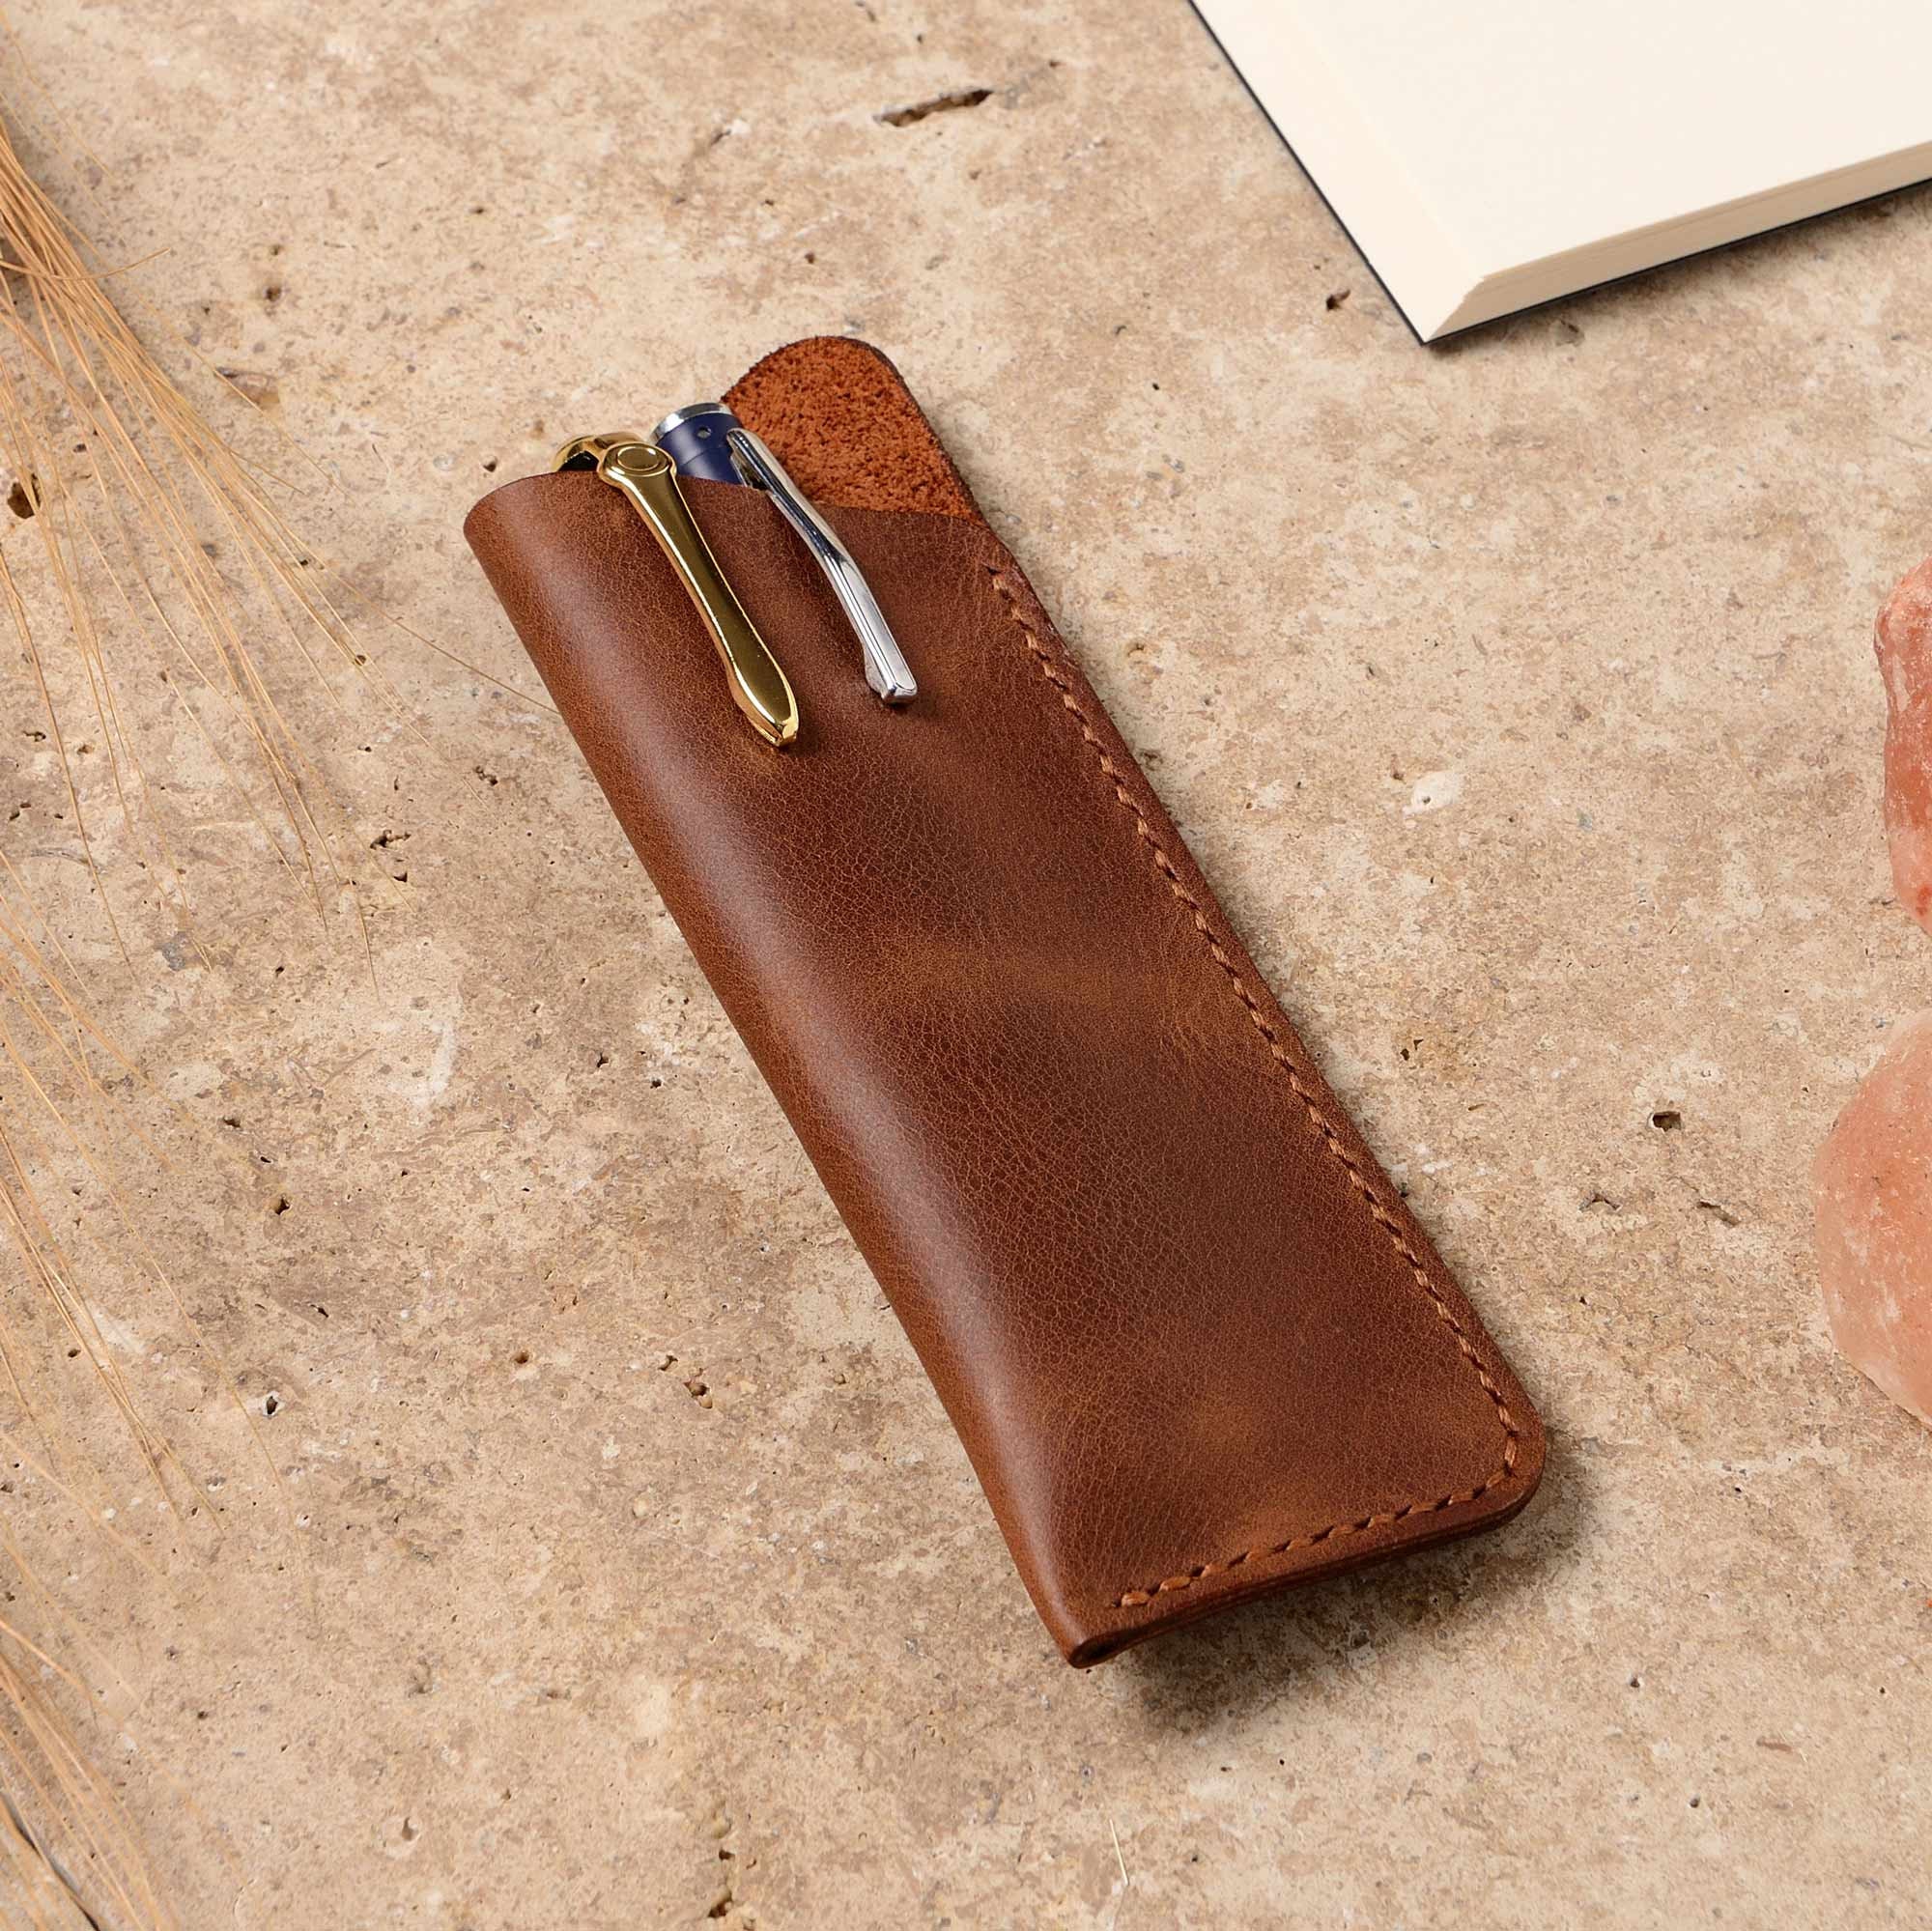 Handmade Roll up Leather Pen Case / Fountain Pen Holder / Pen EDC Holder /  Leather Pencil Pouch Wrap / Leather Pen Roll Case /pen Lover Gift 